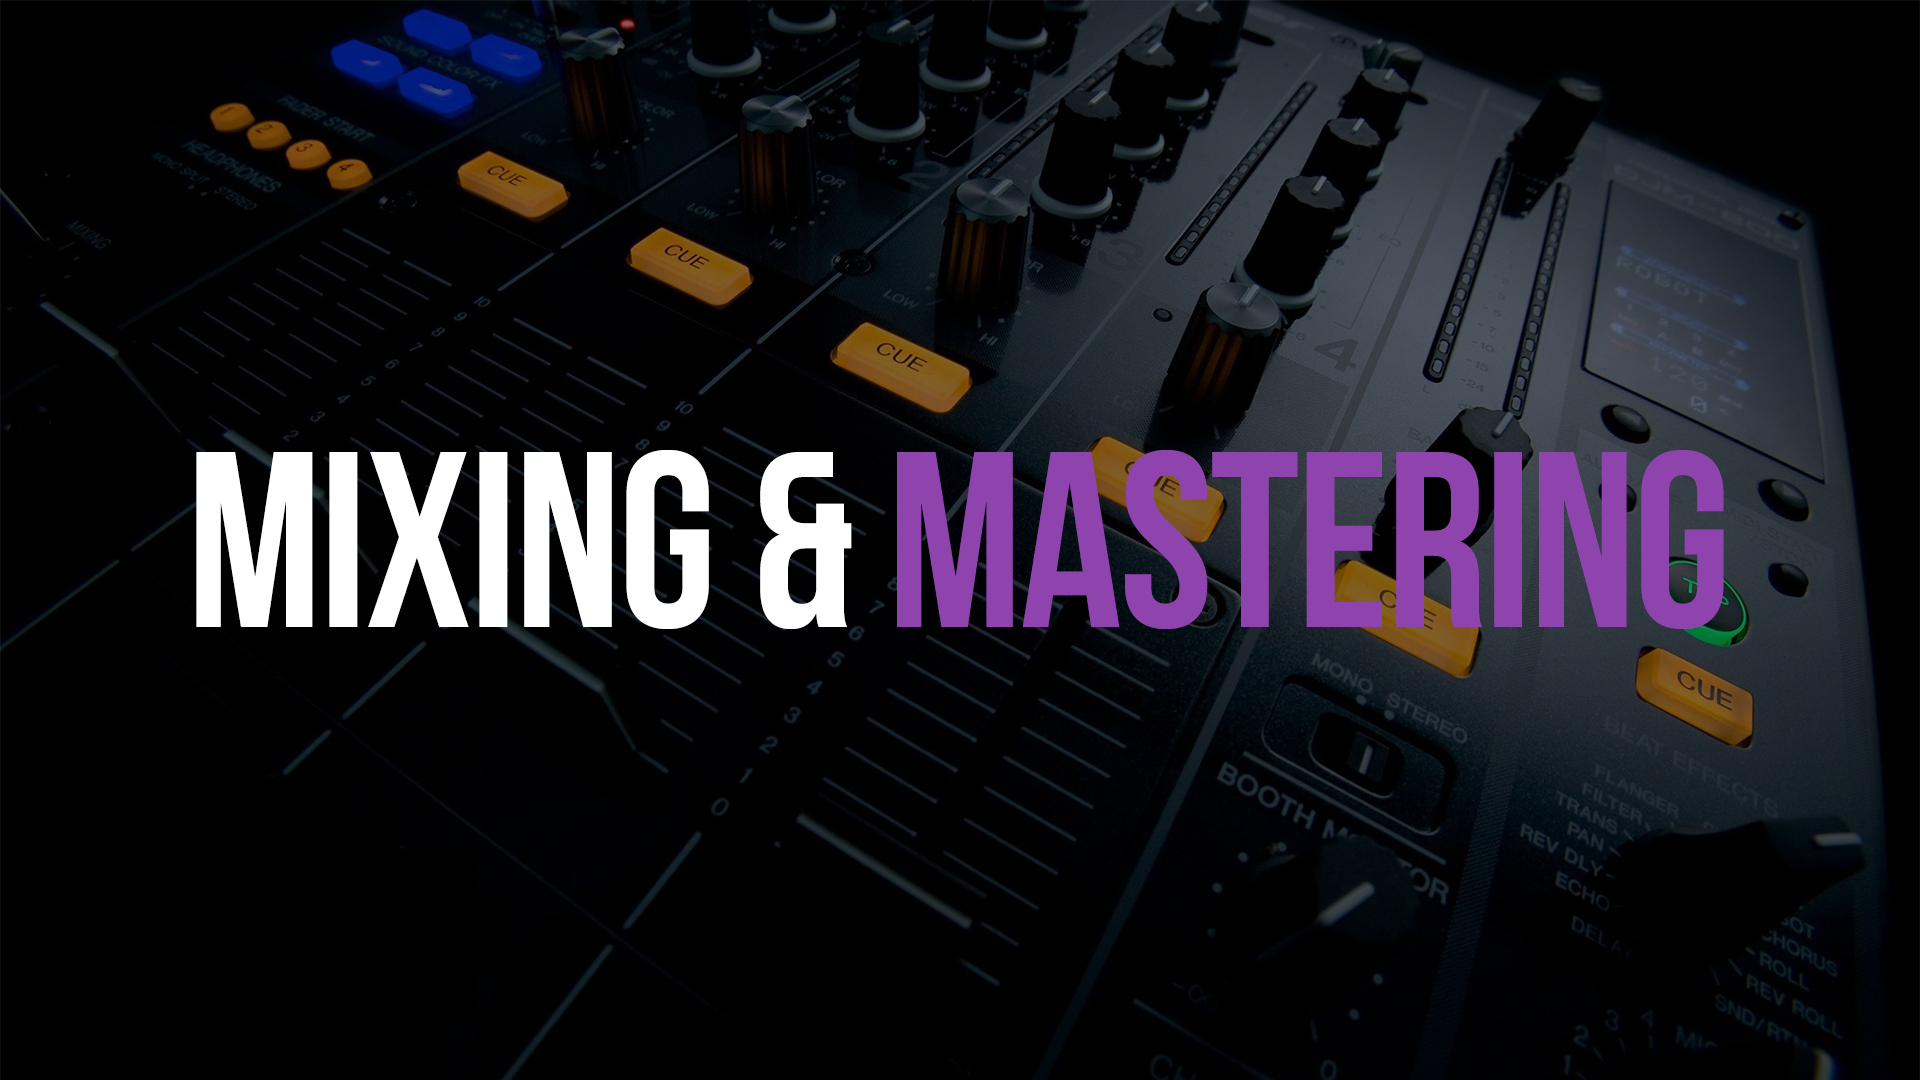 Know how striking is the online mixing and mastering post thumbnail image